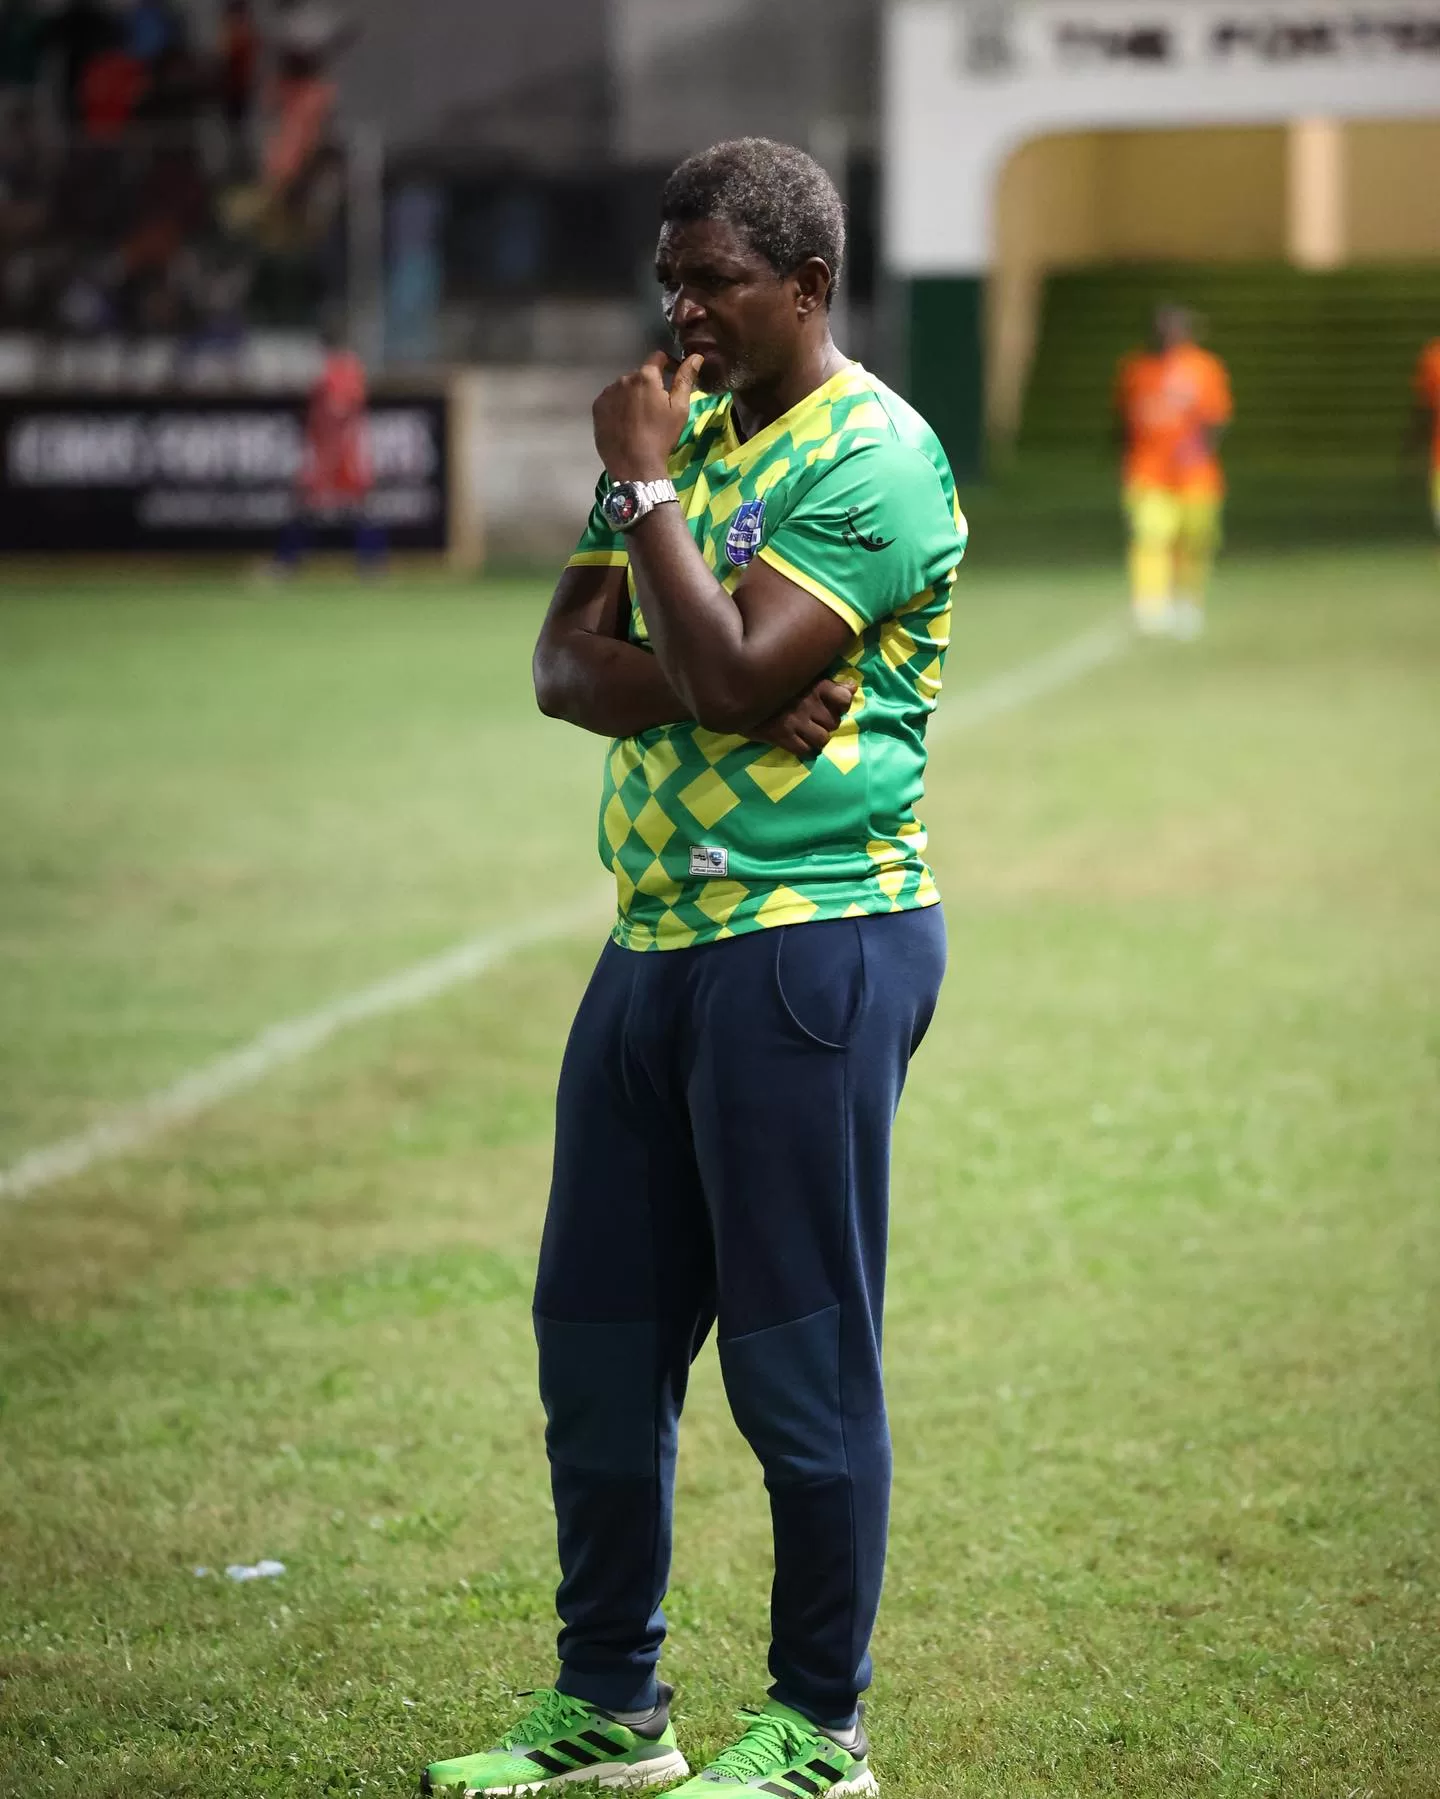 Nsoatreman held Bofoakwa Tano to a goalless draw in week 11 of the Ghana Premier League, gaining second place in the standings and keeping ahead of Bofoakwa Tano, who has had a strong start to the 2023/2024 season. Sunyani fans did not just bash Maxwell Konadu. The followers of Bofoakwa Tano allegedly beat up referee Robert Musey and his aides as well. The Ghana Football Association has failed to respond to the assault on Maxwell Konadu and game officials.